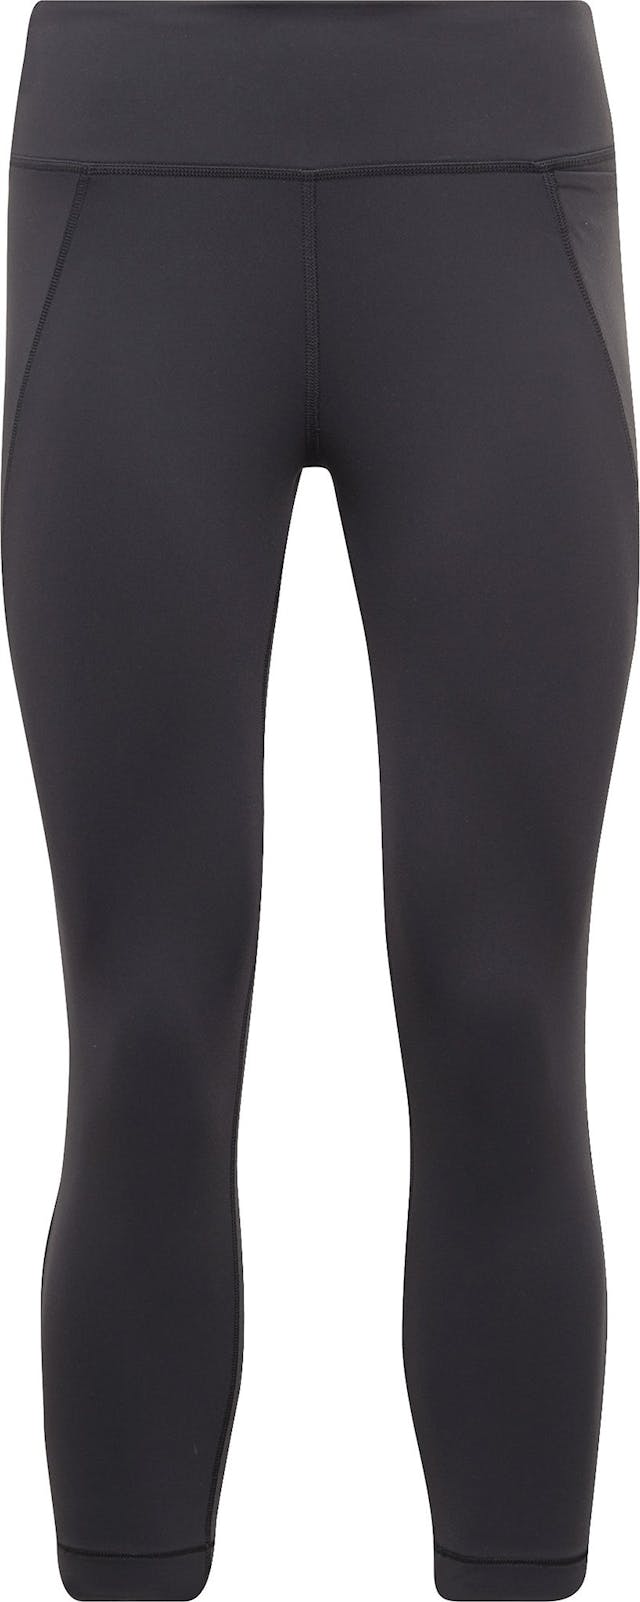 Product image for Lux 3/4 Leggings - Women's